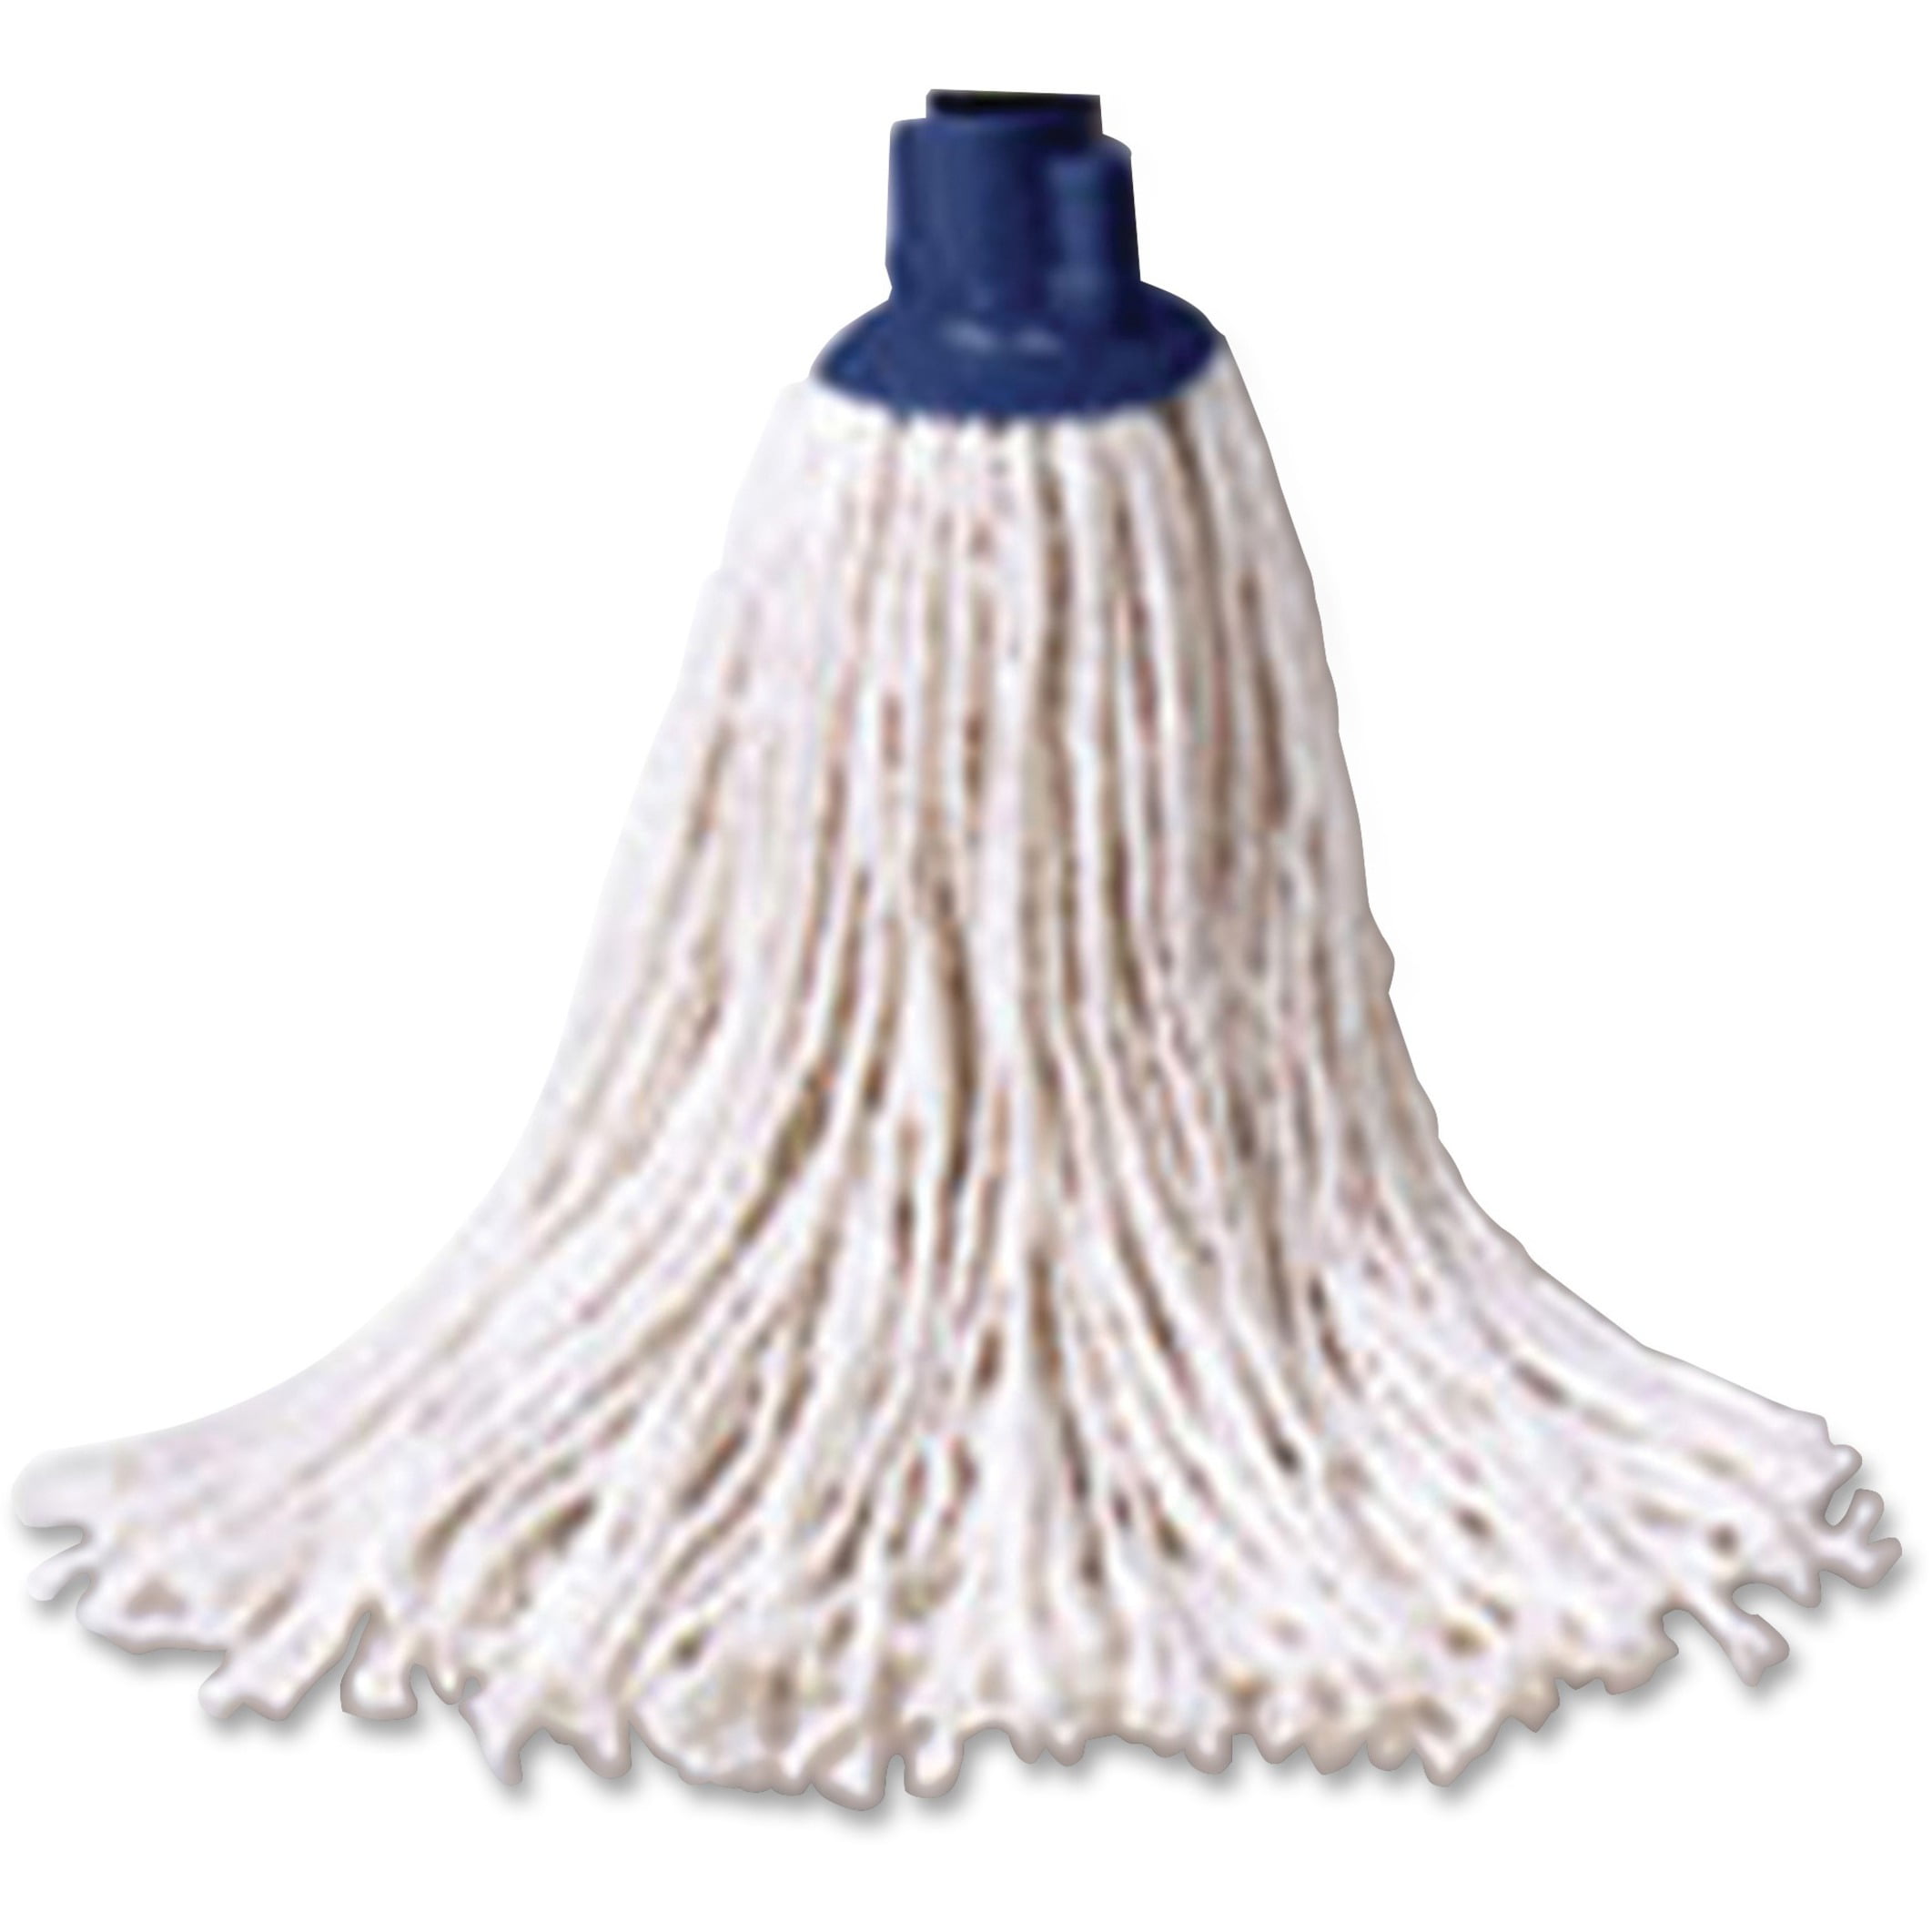 Jumbo Replacement Cushion Head MOP Rayon Poly Threaded Screw on # 14 USA for sale online 